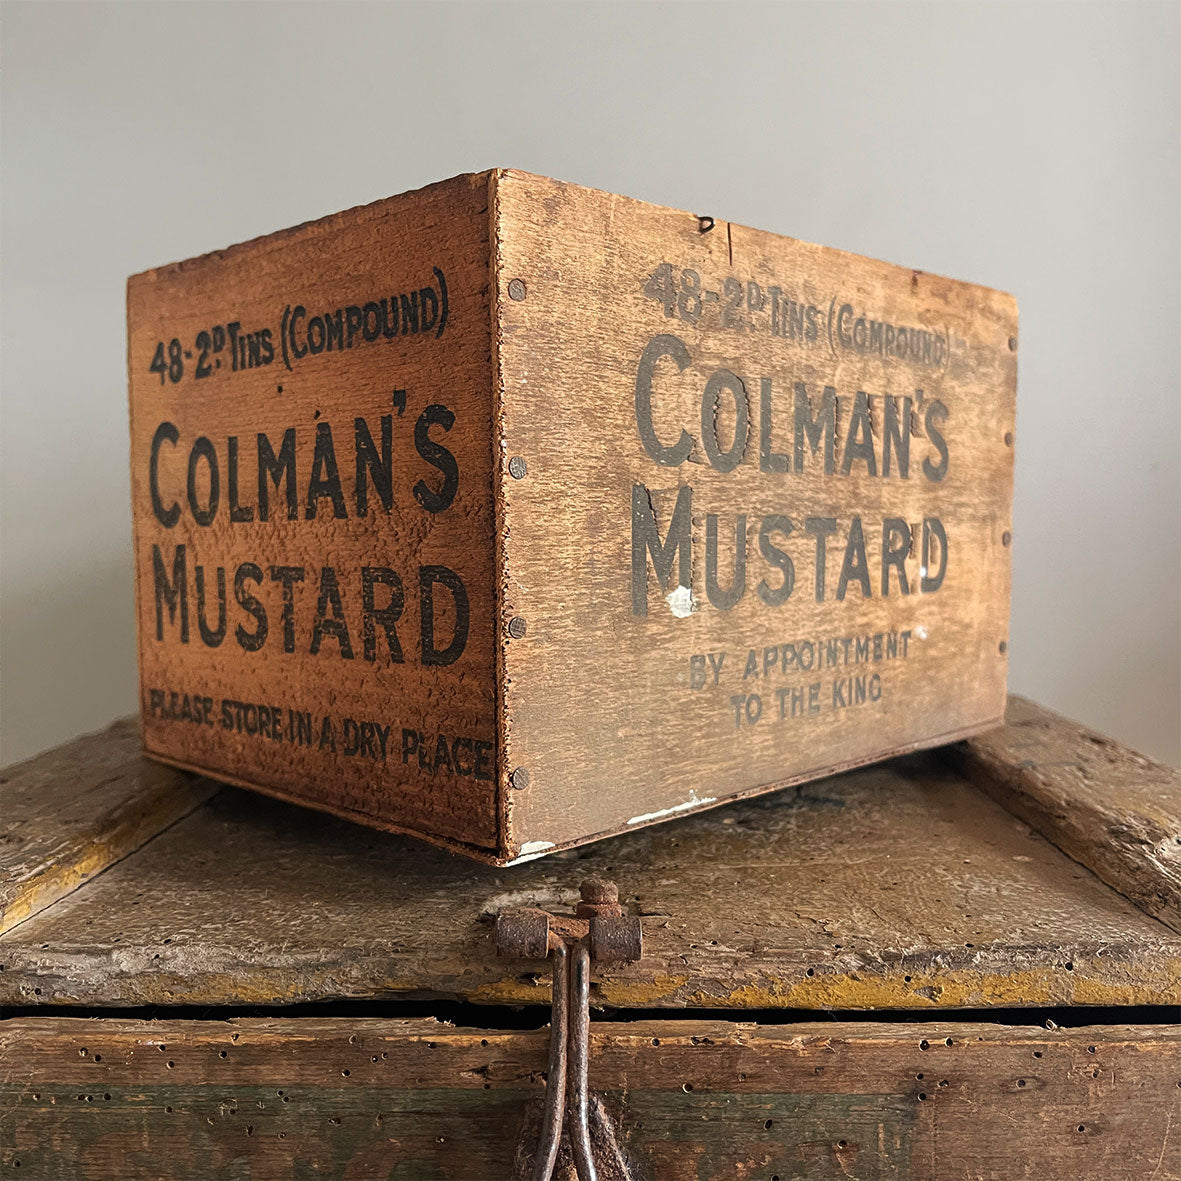 A petit, early Coleman's Mustard Box that would have held 48 2d tins of Colman's Mustard (Compound). Nice bright colours to the front. - SHOP NOW - www.intovintage.co.uk